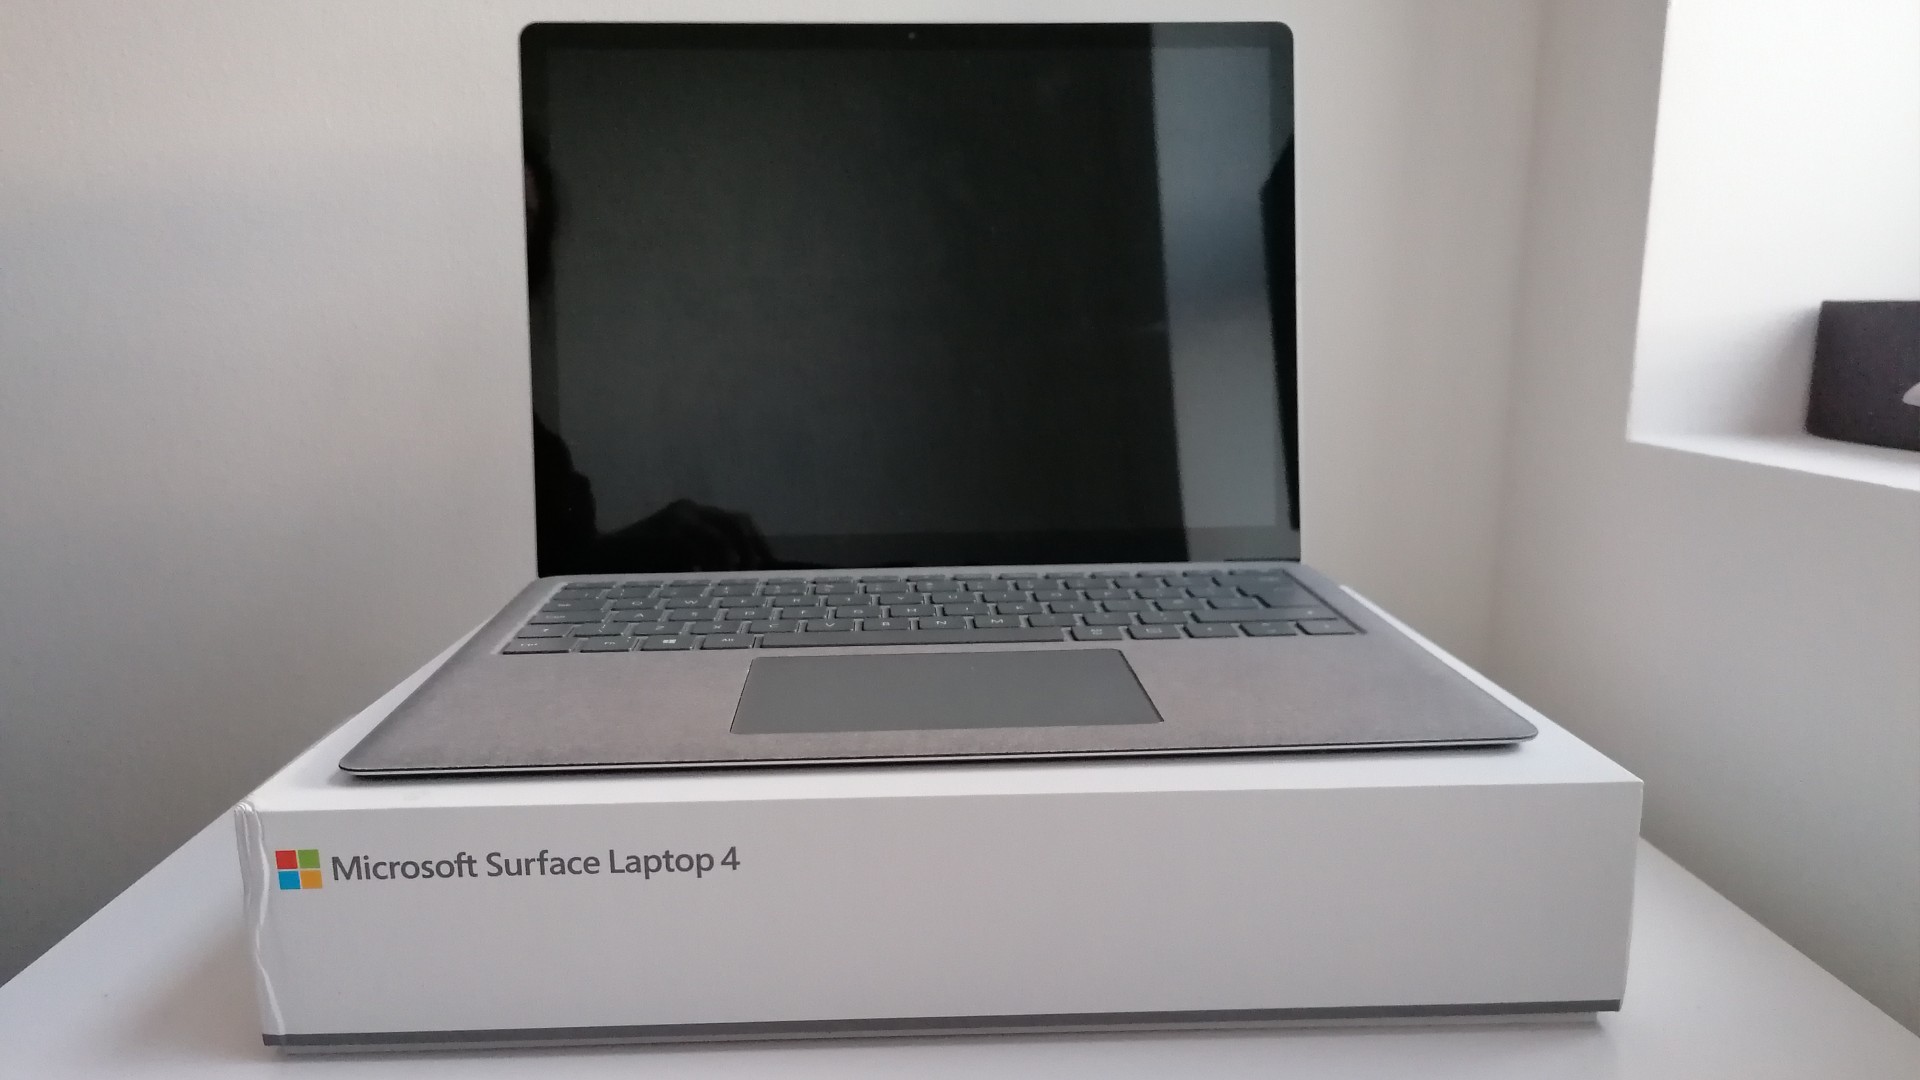 Microsoft Surface Laptop 4 box_front view open on box_Mina Frost